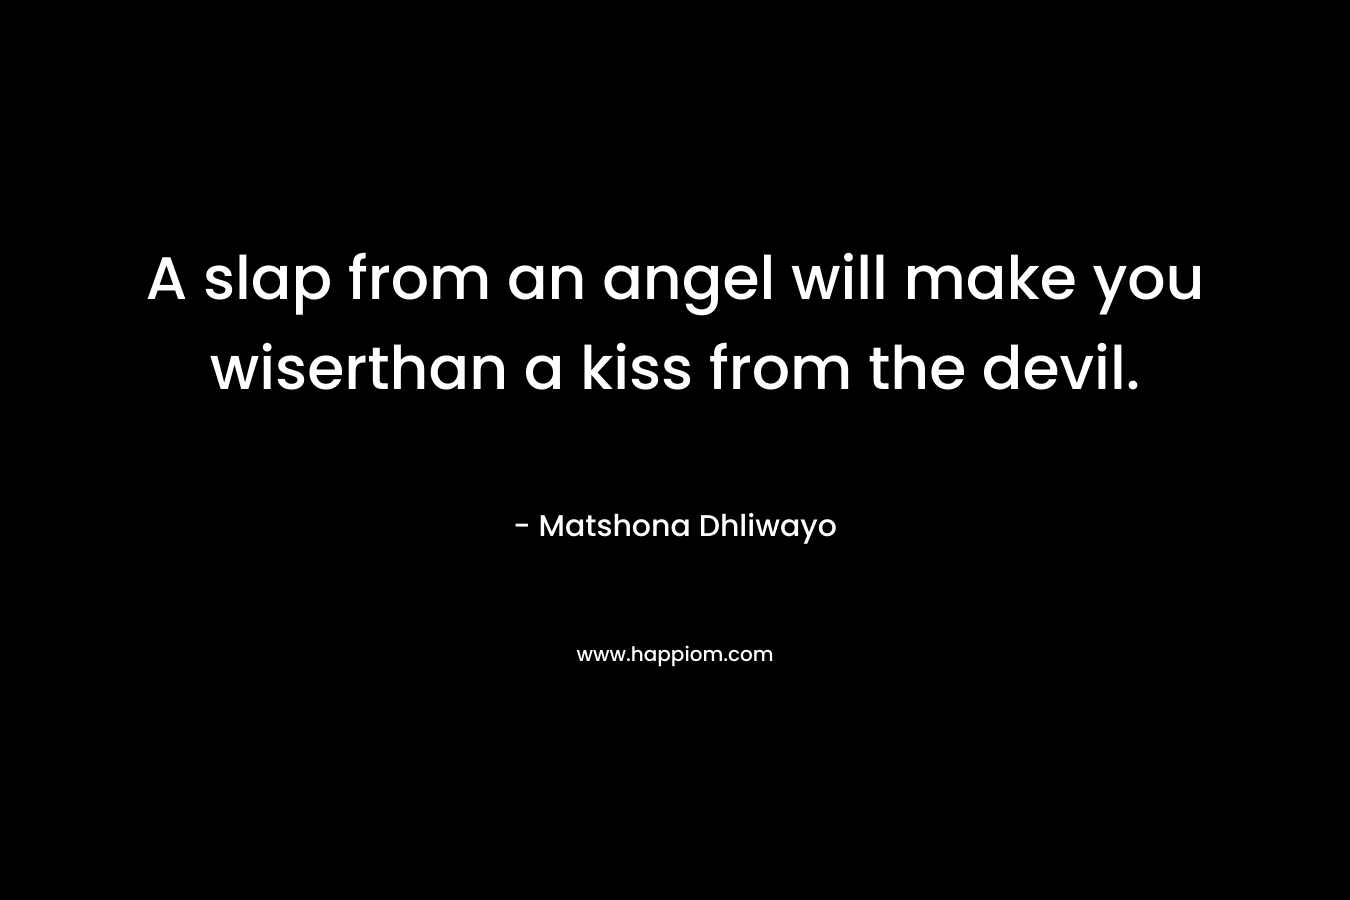 A slap from an angel will make you wiserthan a kiss from the devil.